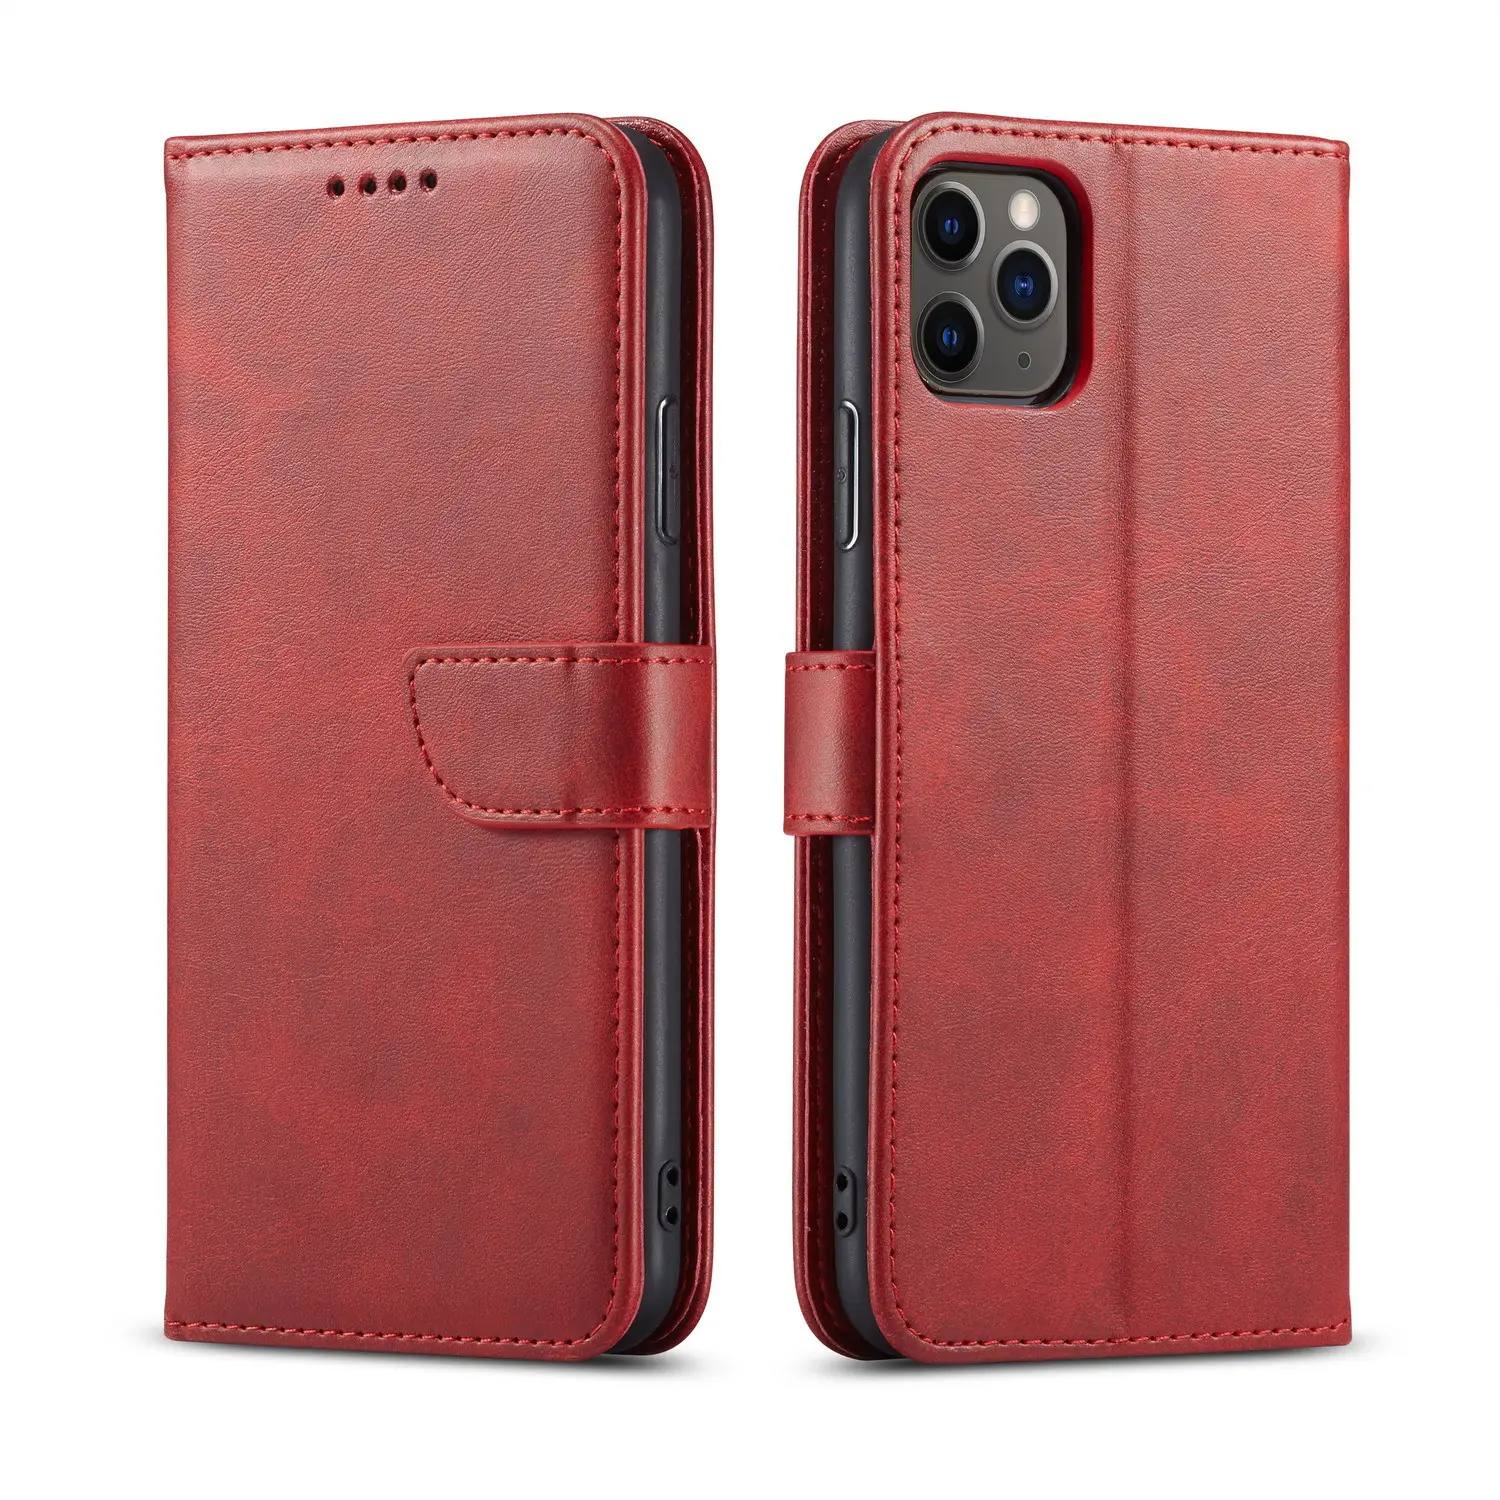 For Iphone 13 Pro Max Case Flip Wallet Phone Case On Iphone 12 Mini Case Leather high quality Cover For Iphone 11 XR XS 8 7 Plus Bag